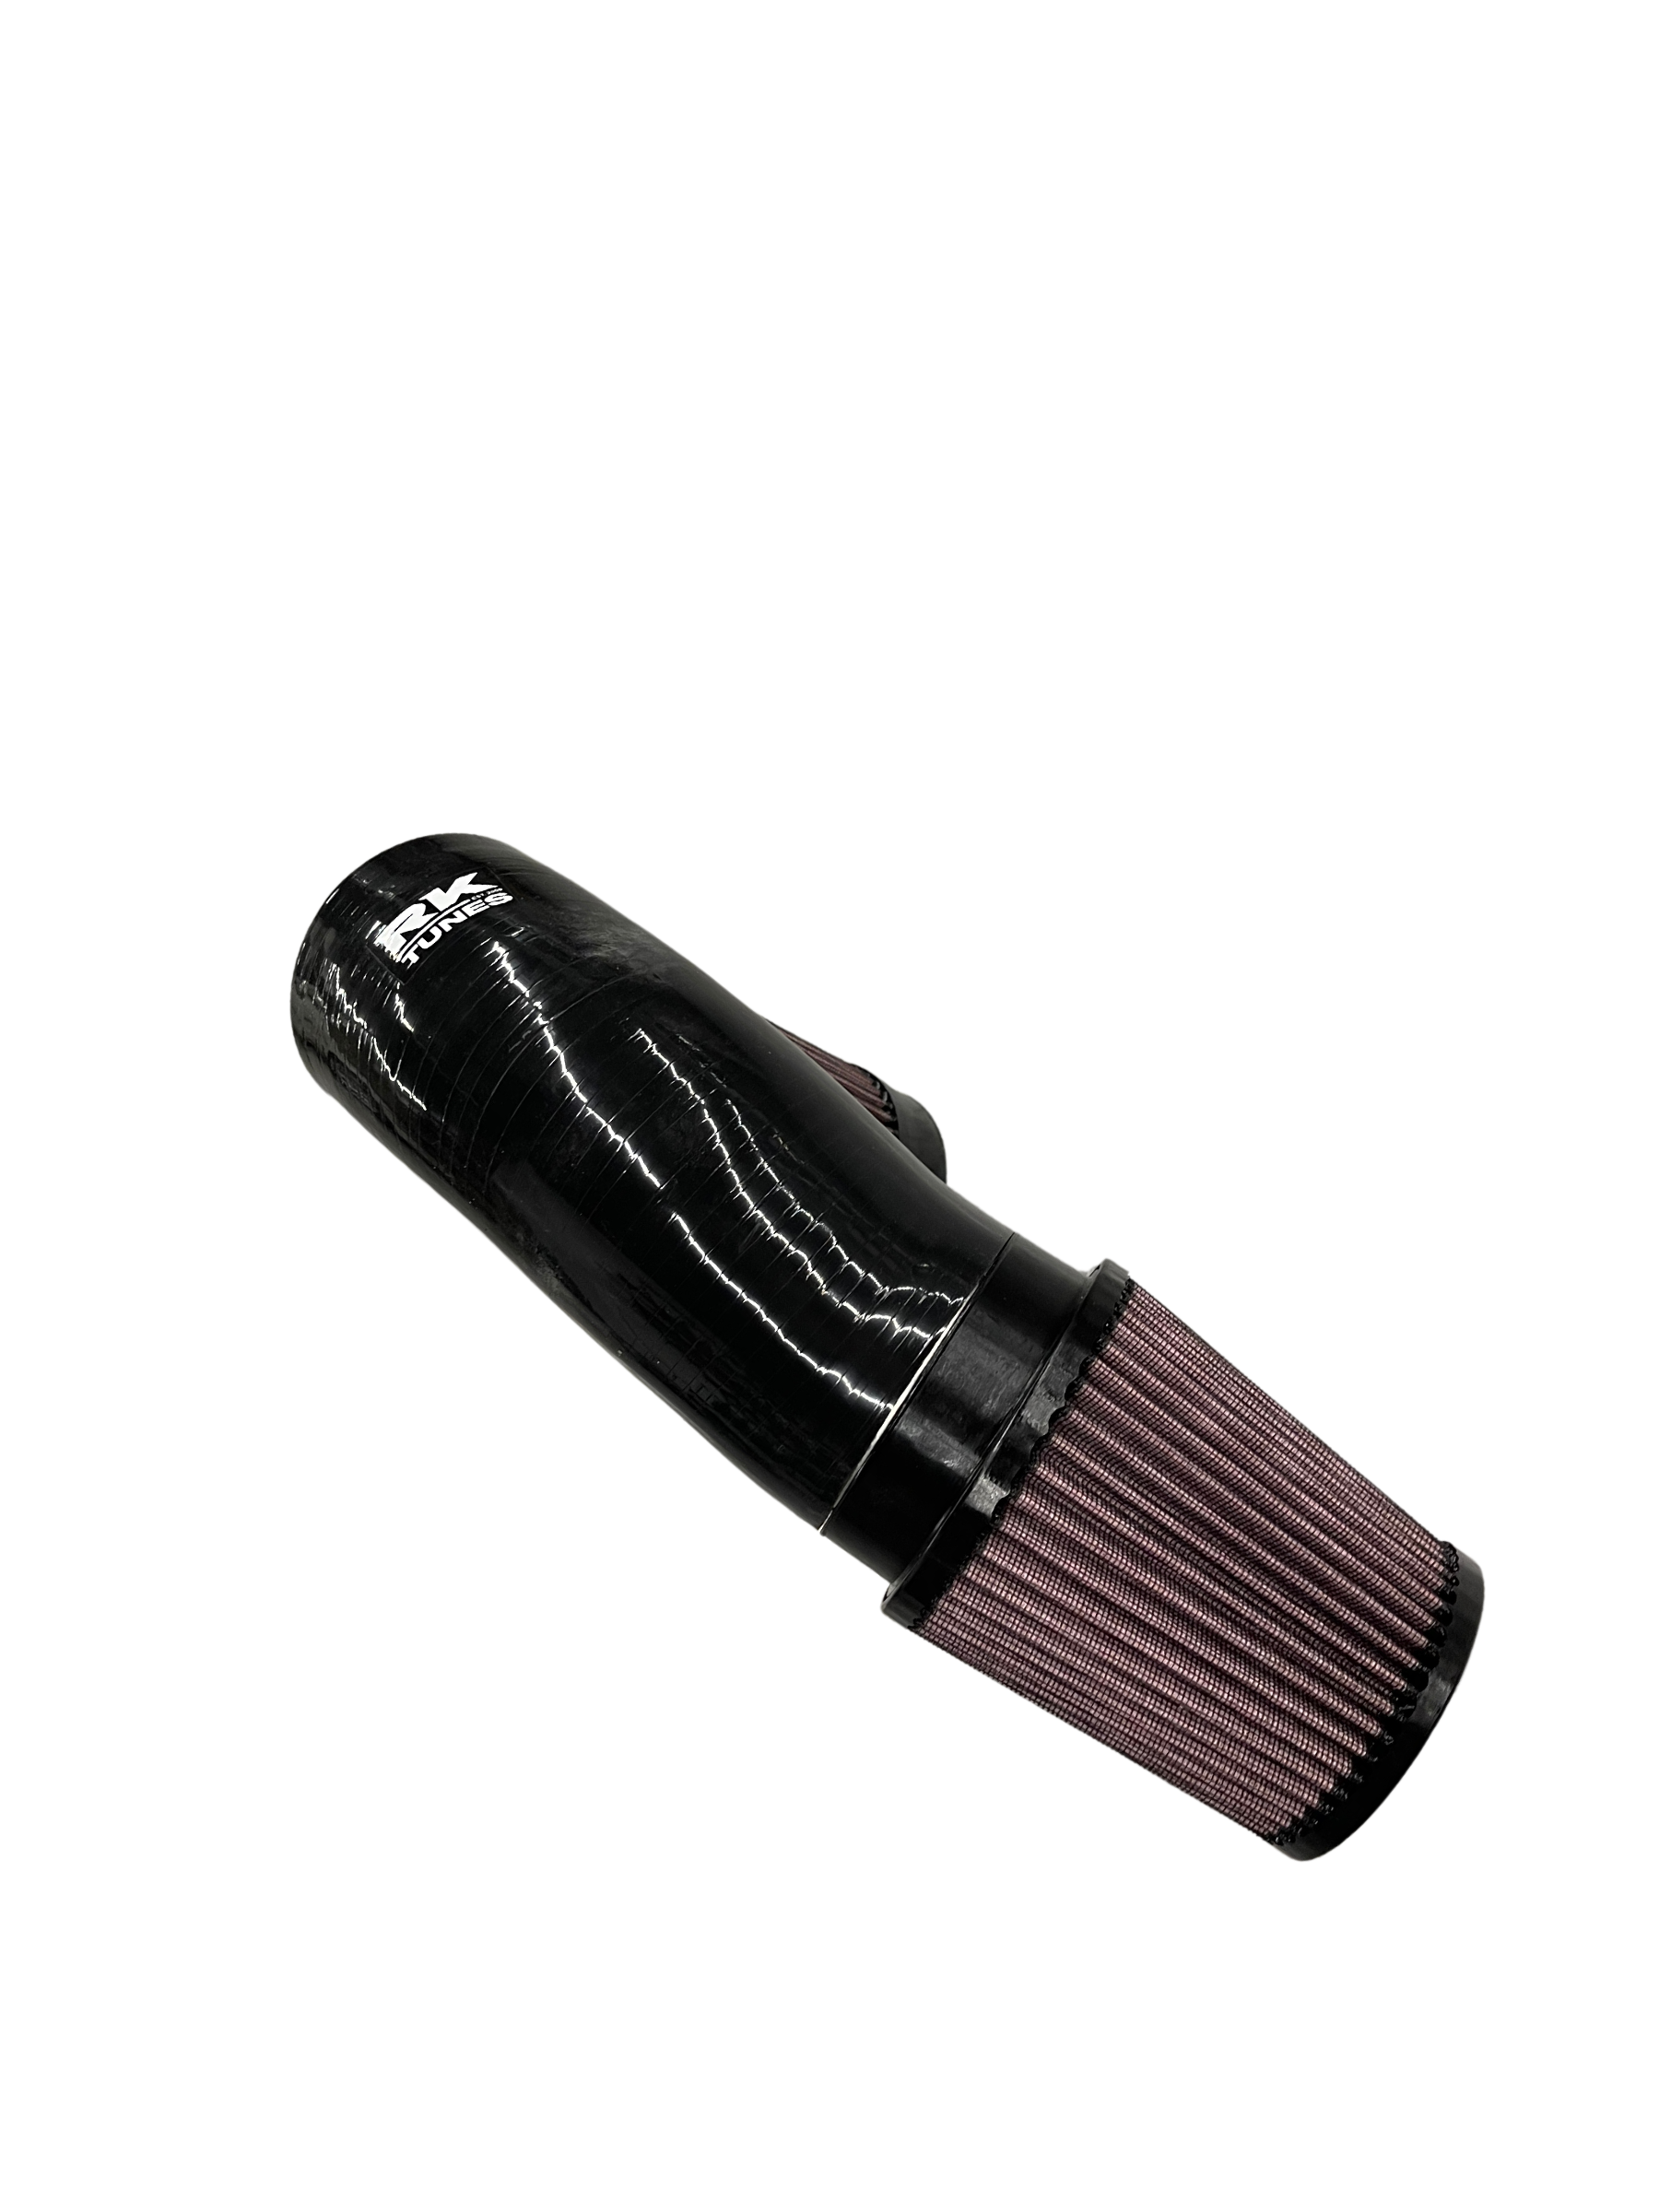 E46 M3 Reinforced Silicone Cold Air Intake For S54